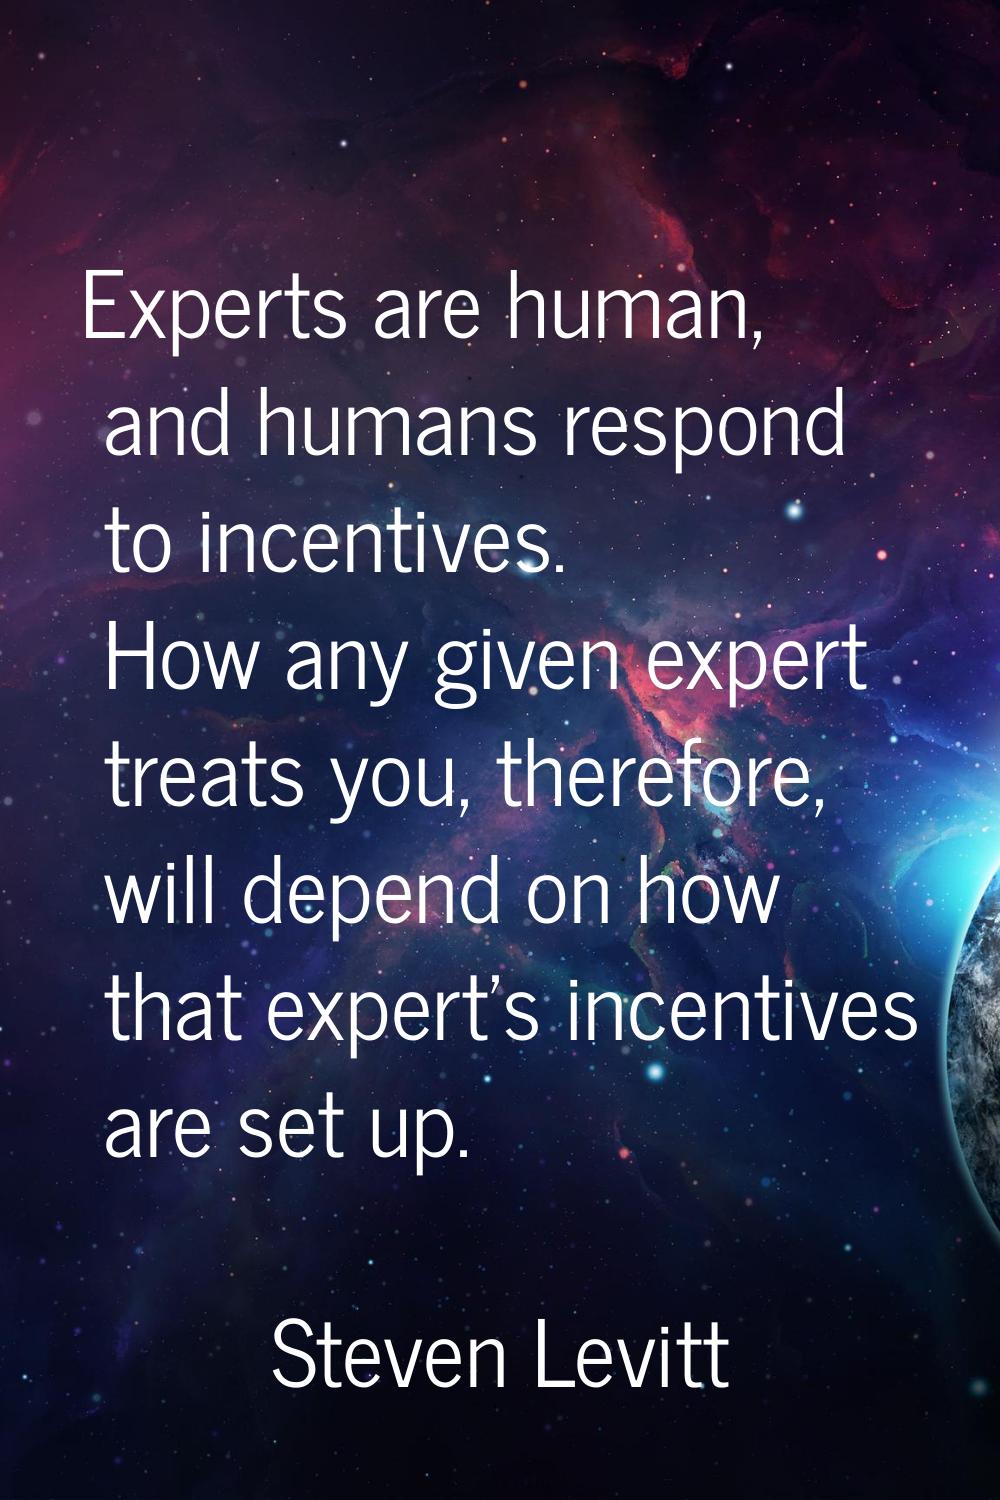 Experts are human, and humans respond to incentives. How any given expert treats you, therefore, wi